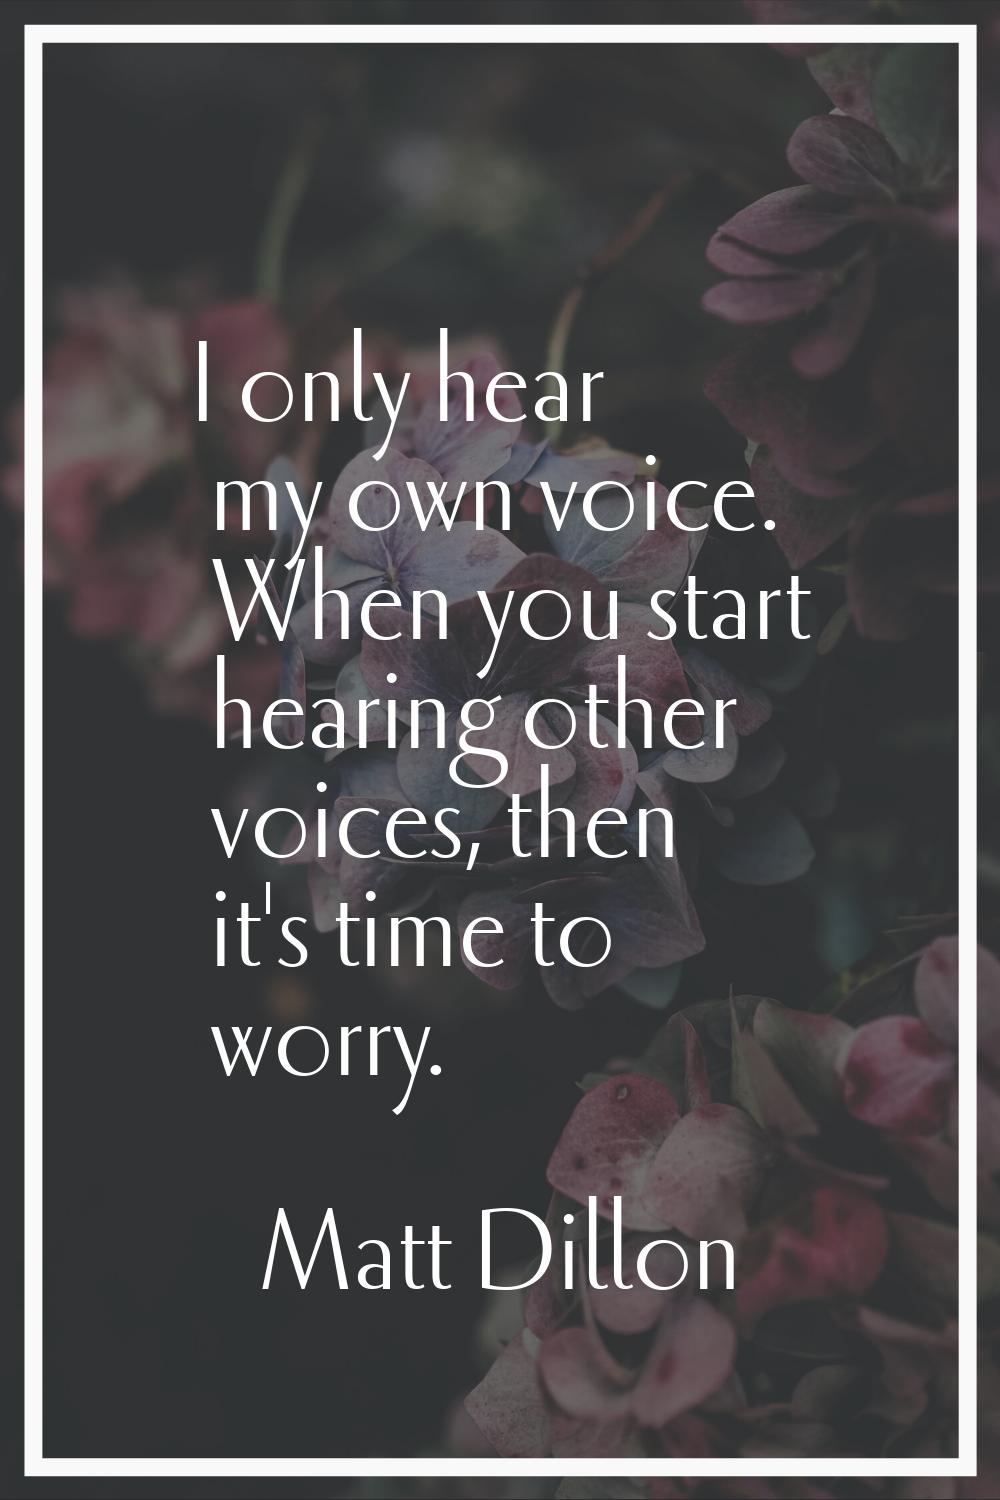 I only hear my own voice. When you start hearing other voices, then it's time to worry.